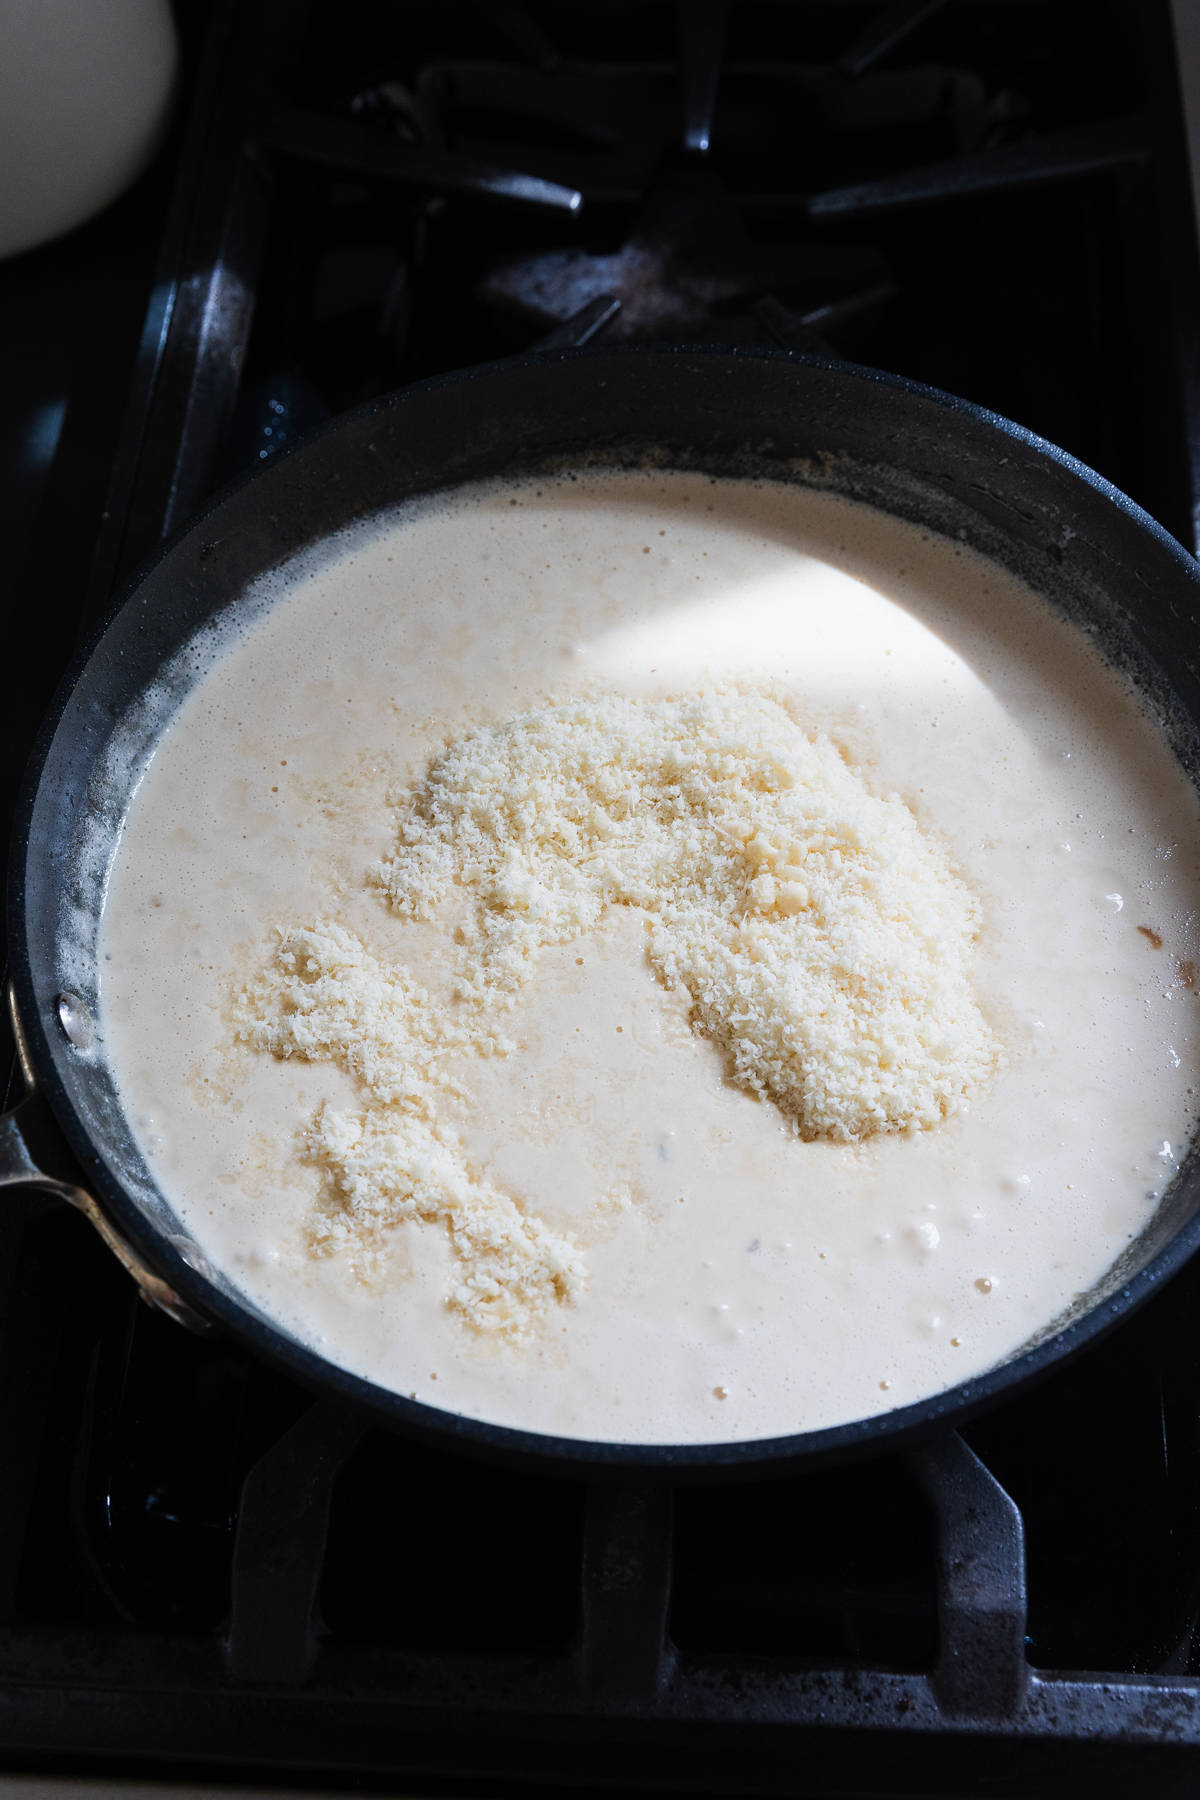 Parmesan cheese added to make alfredo sauce.